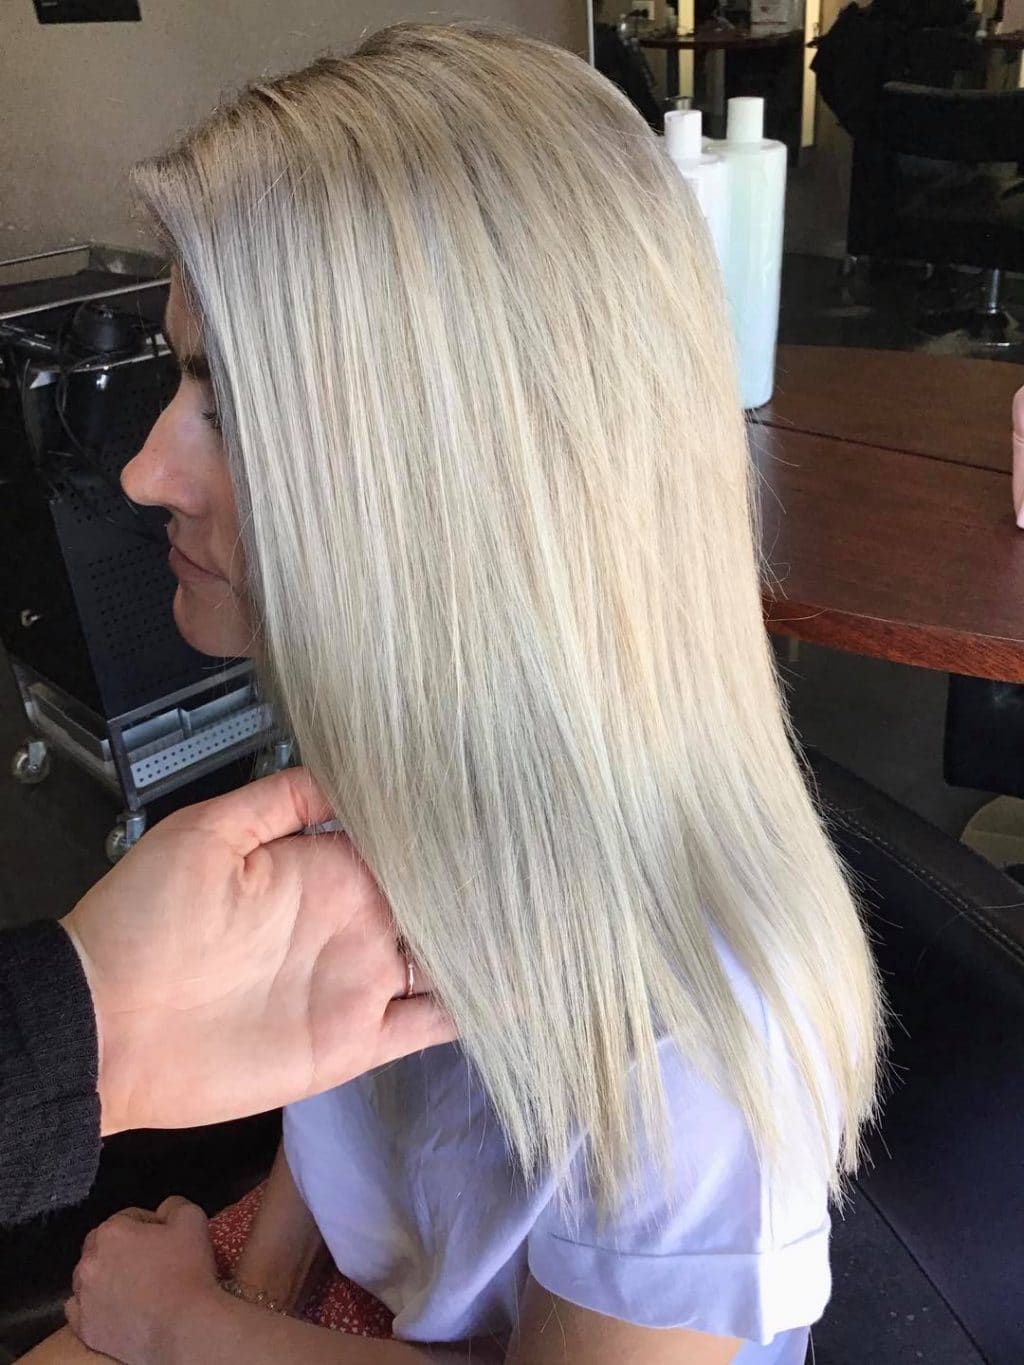 ❄️ Clean Icy Blonde By Courtney ❄️